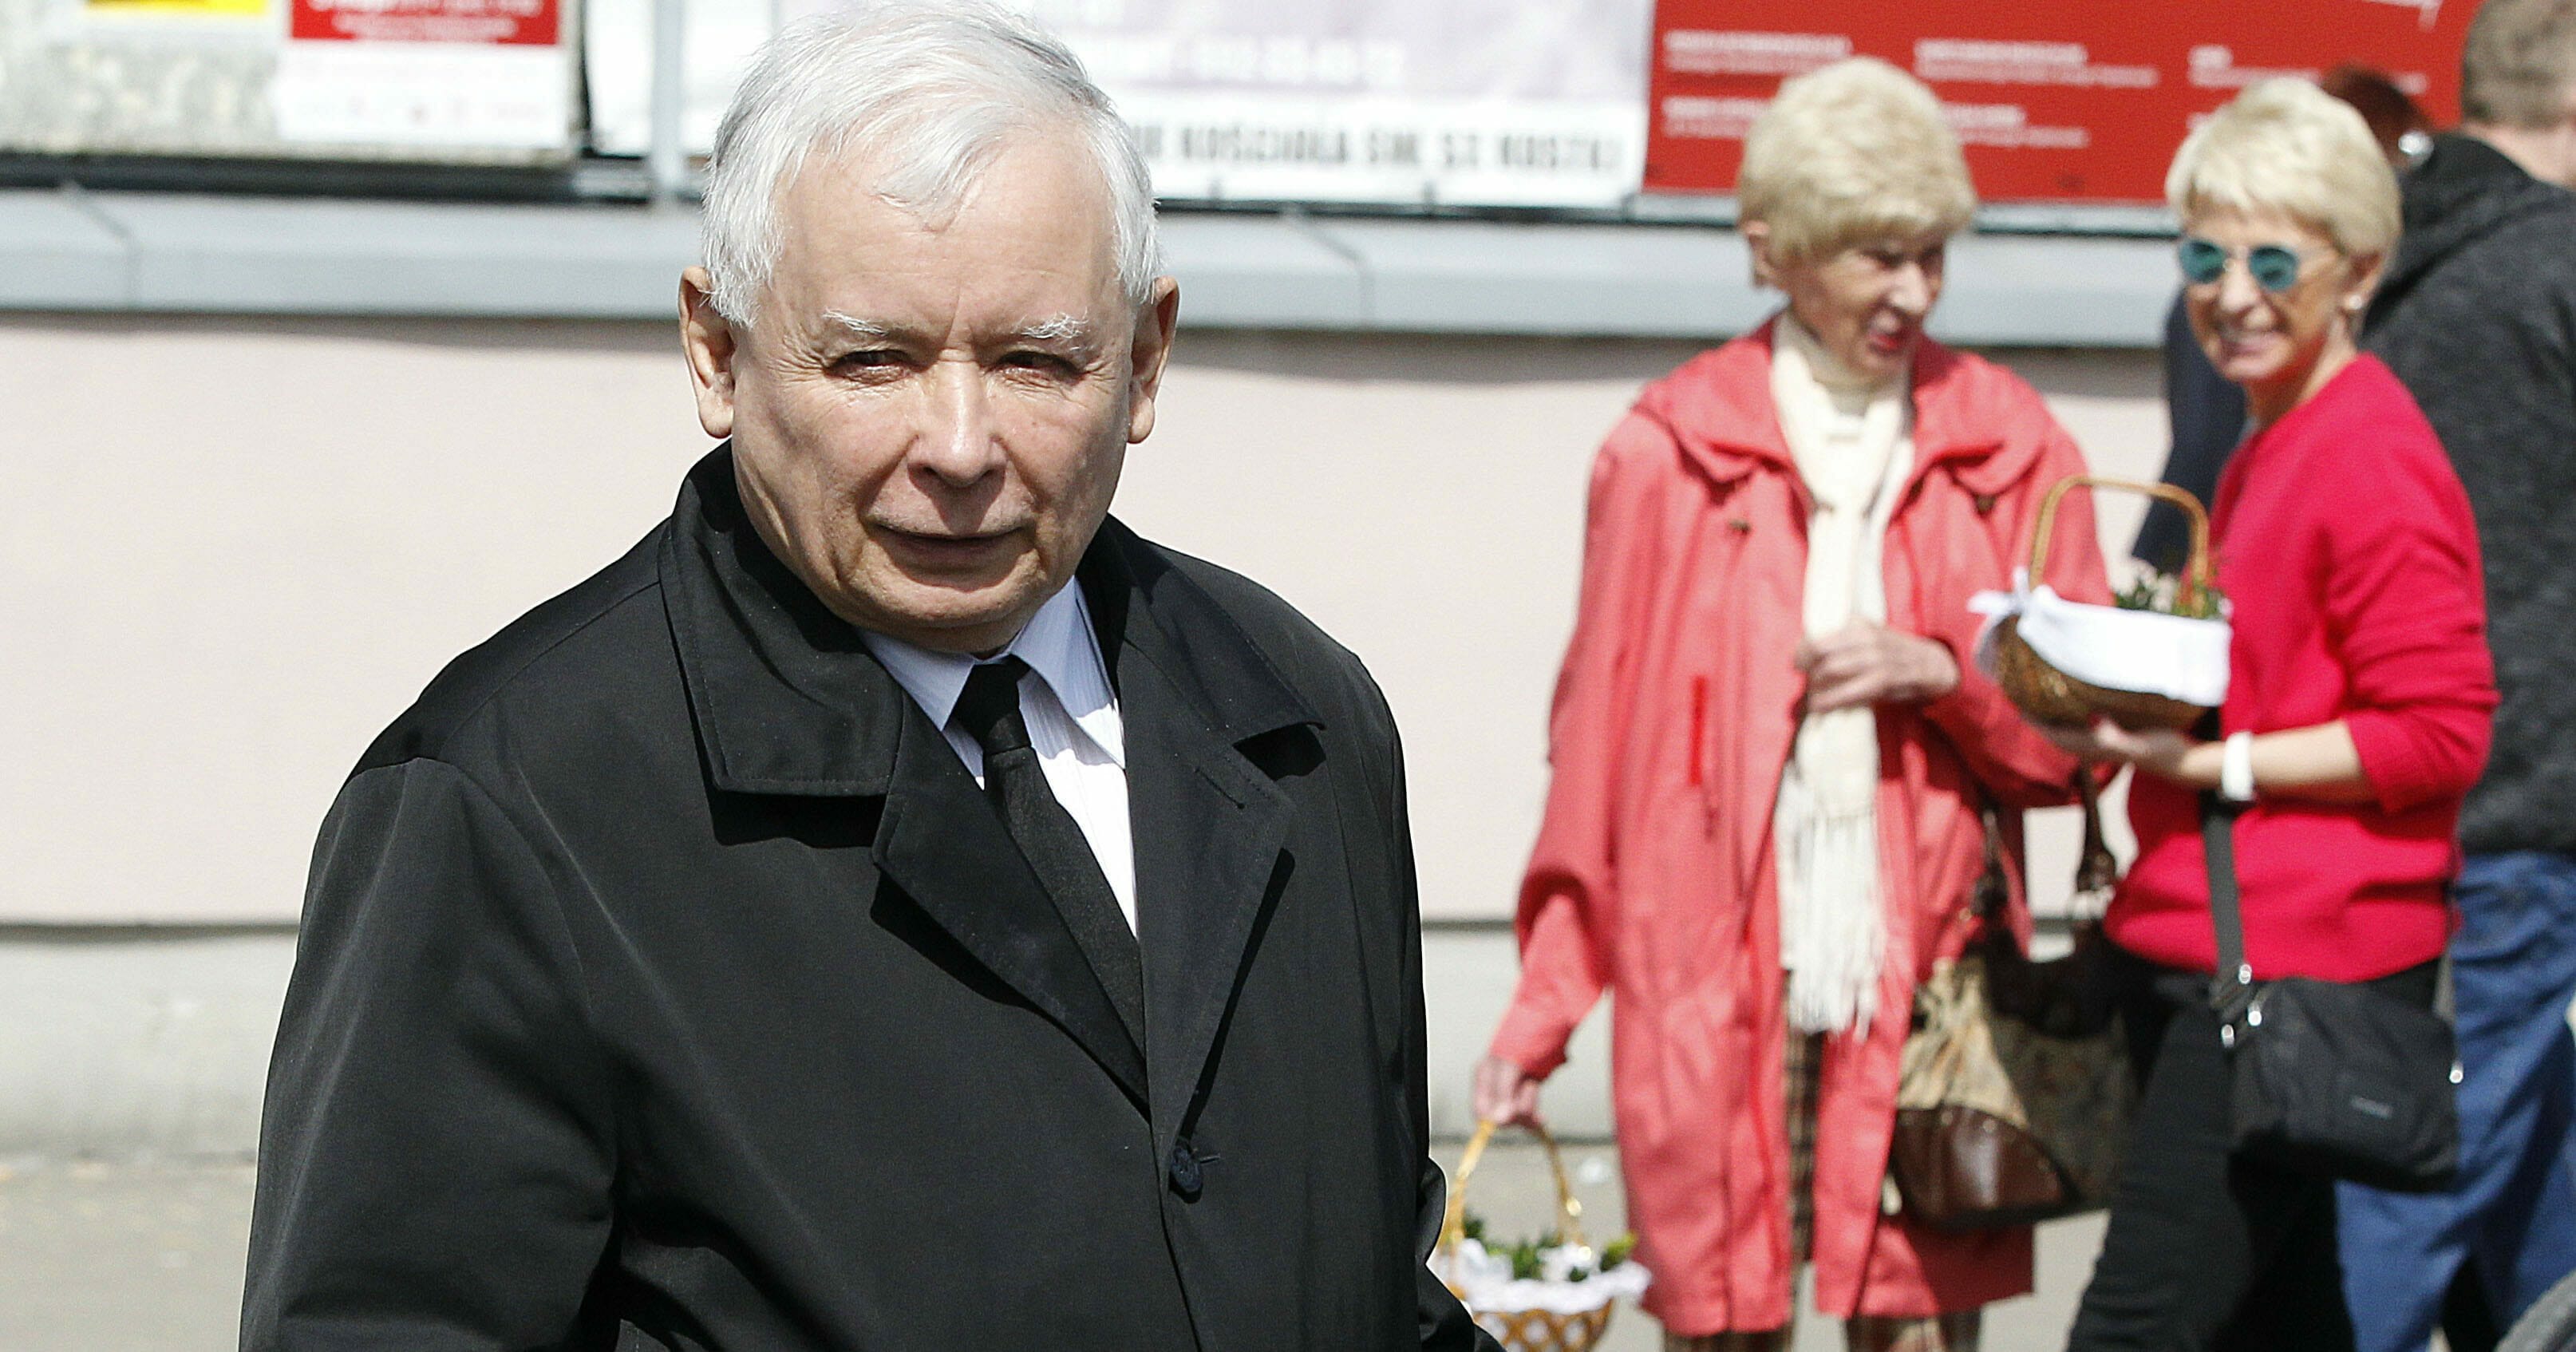 Jaroslaw Kaczynski, the leader of Poland's conservative ruling party, takes part in a Polish tradition of taking a basket to church for a blessing in Warsaw on Saturday, April 20, 2019.